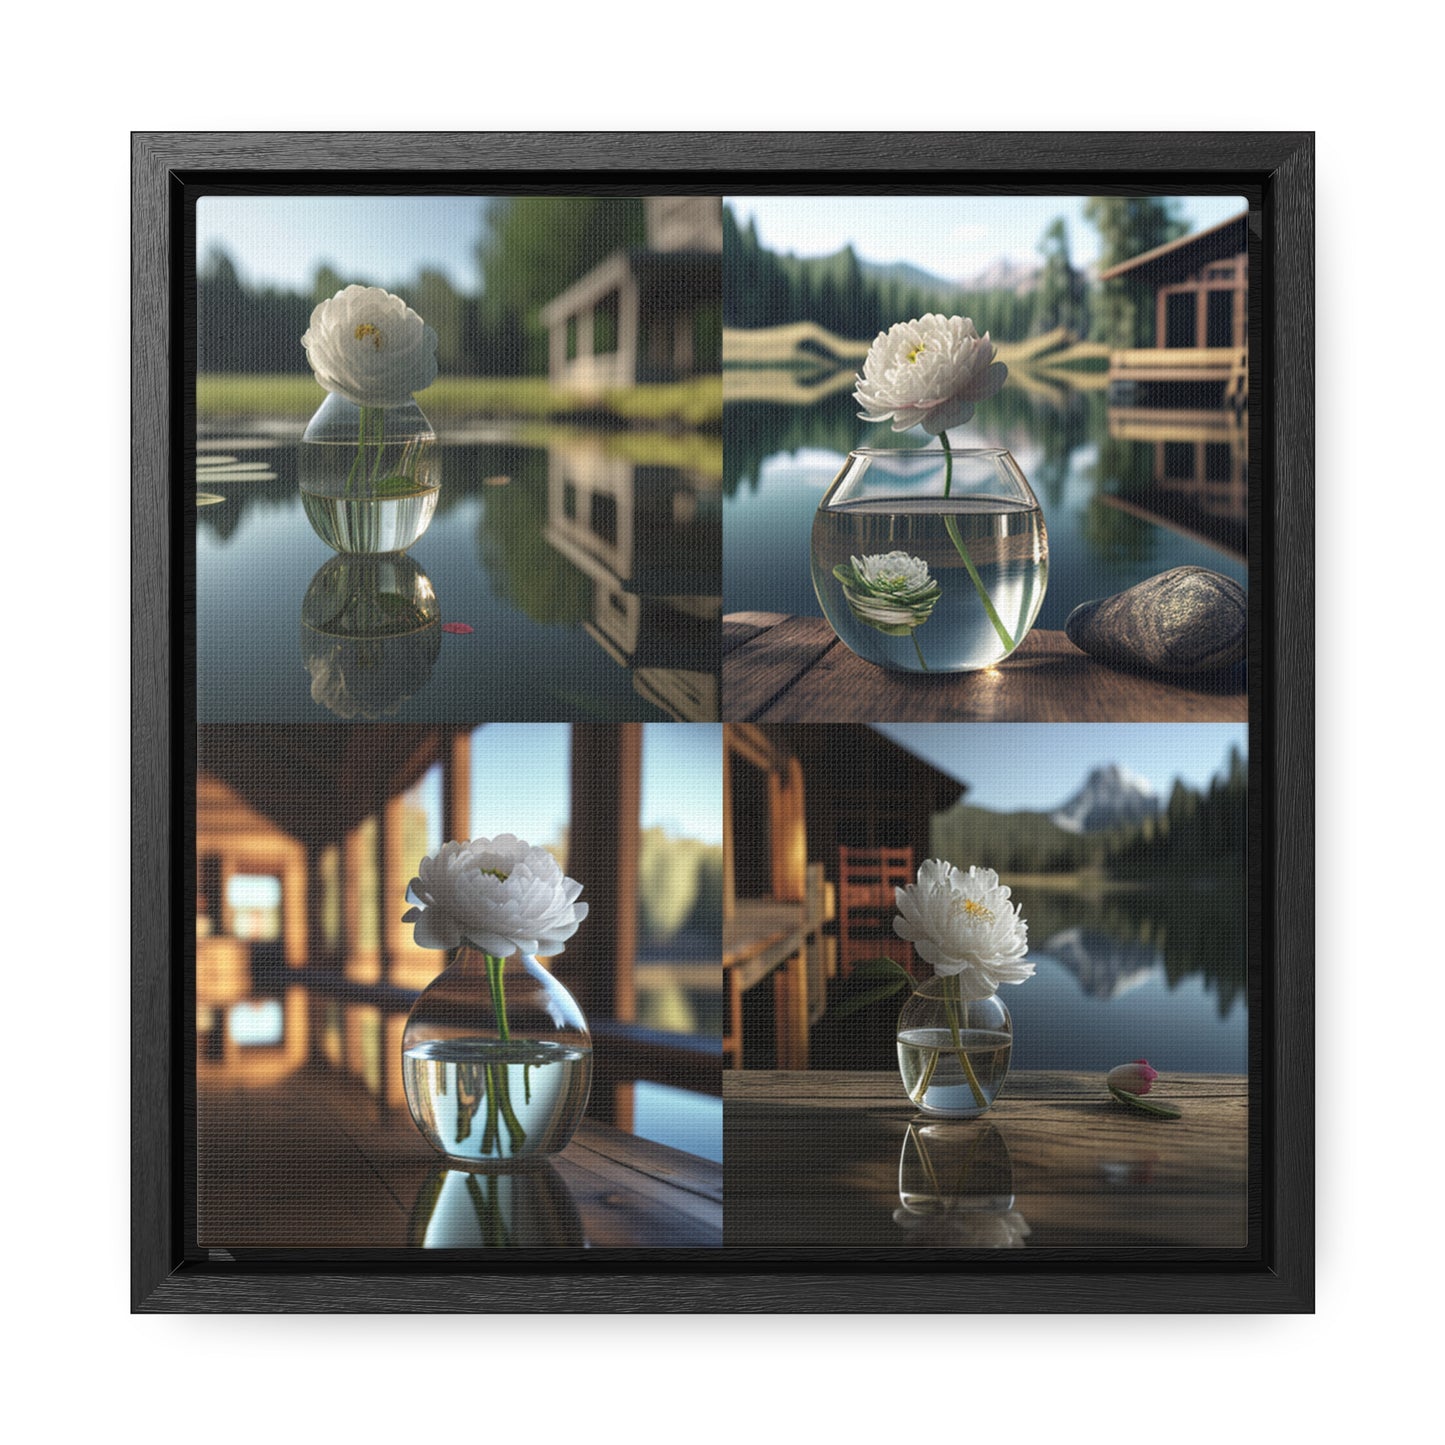 Gallery Canvas Wraps, Square Frame White Peony glass vase 5